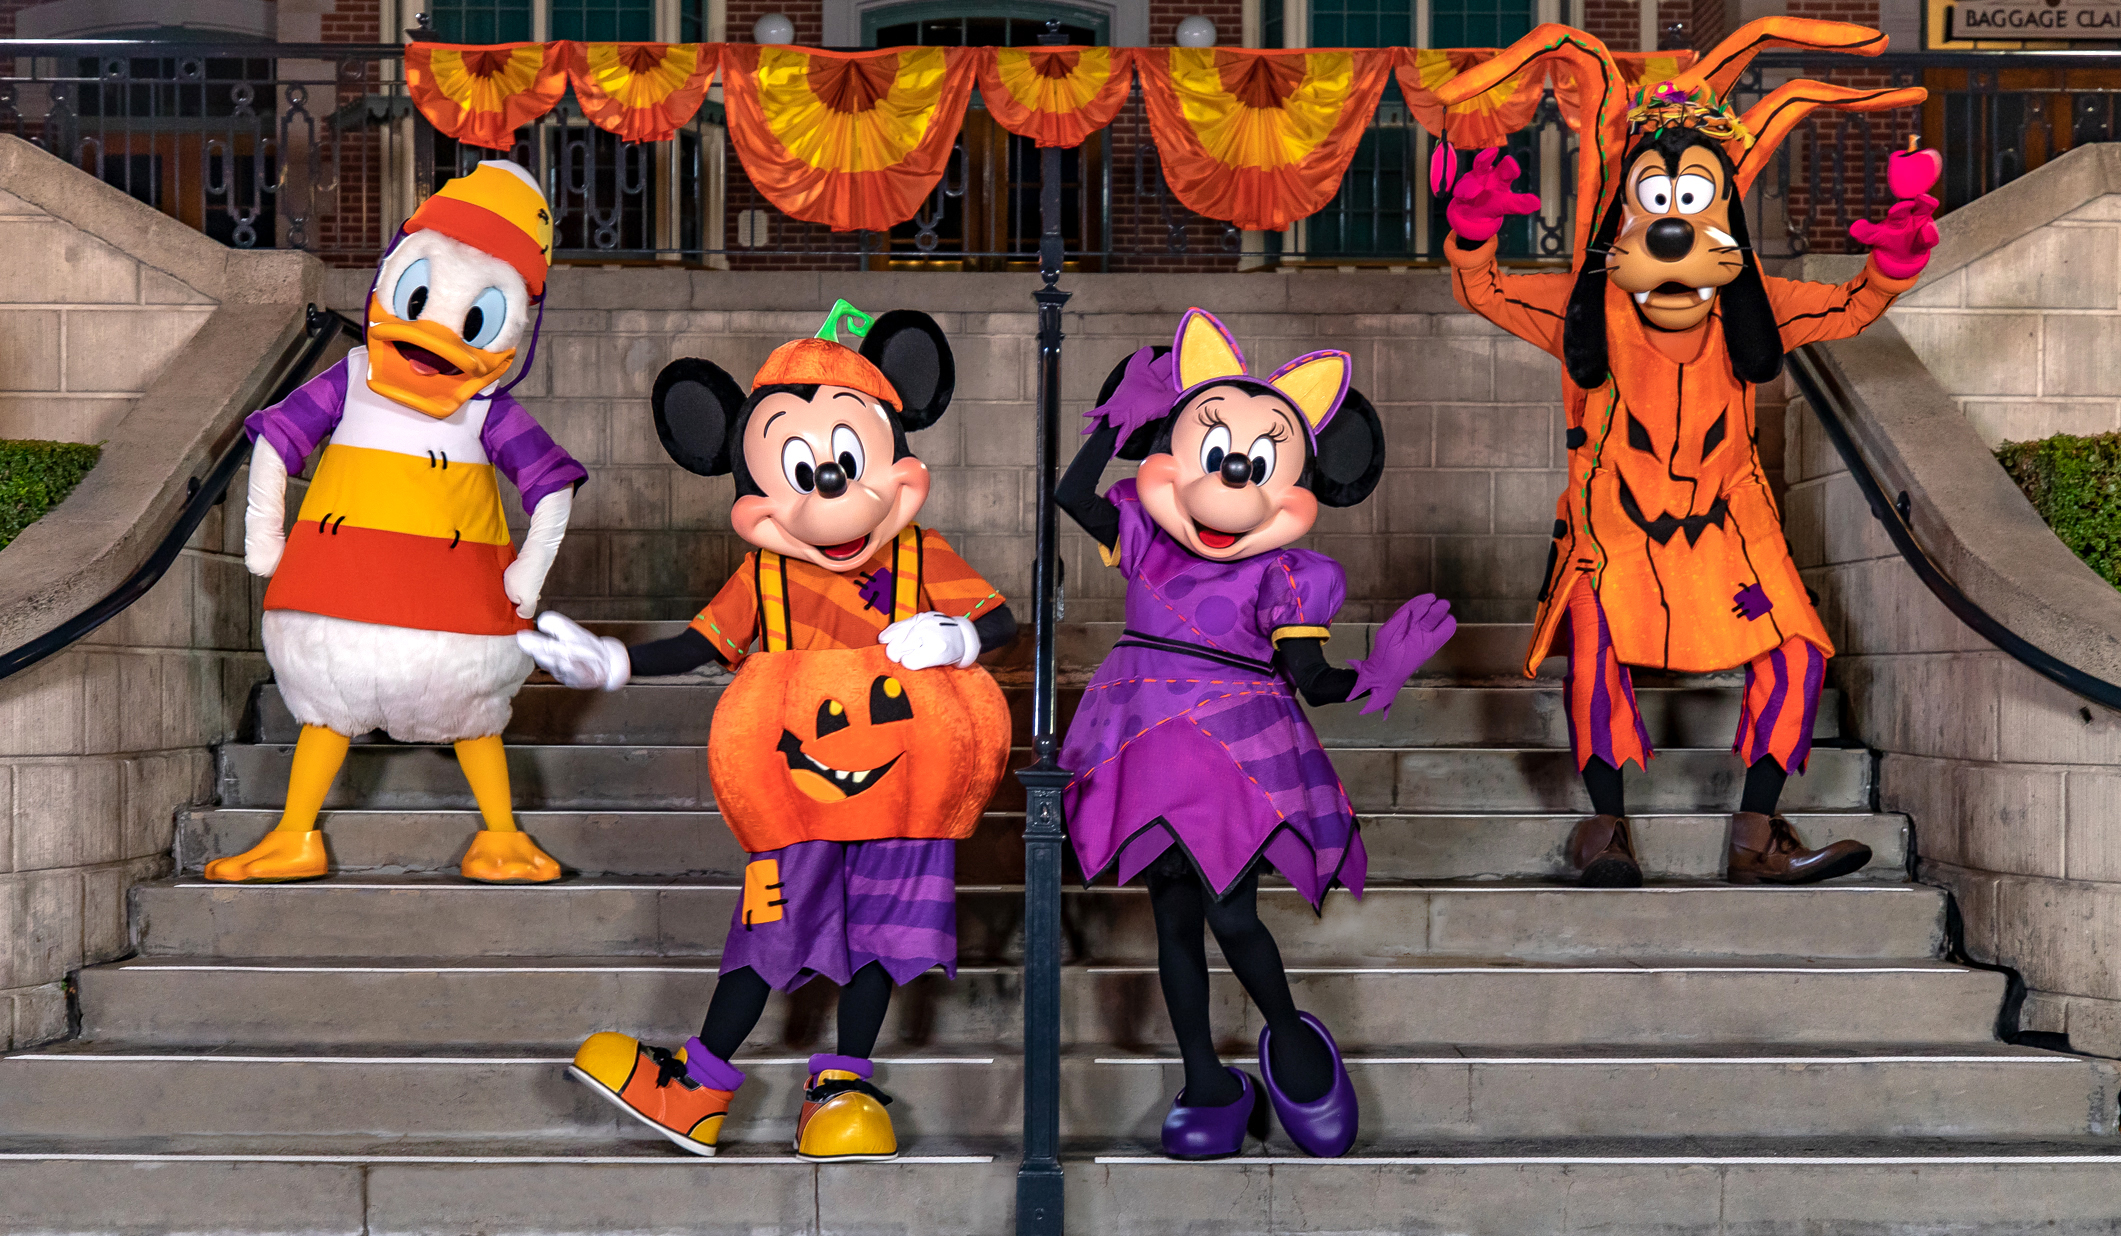 Donald, Mickey, Minnie and Goofy in Halloween costumes on the steps to the Main Street U.S.A. Train station at Disneyland.